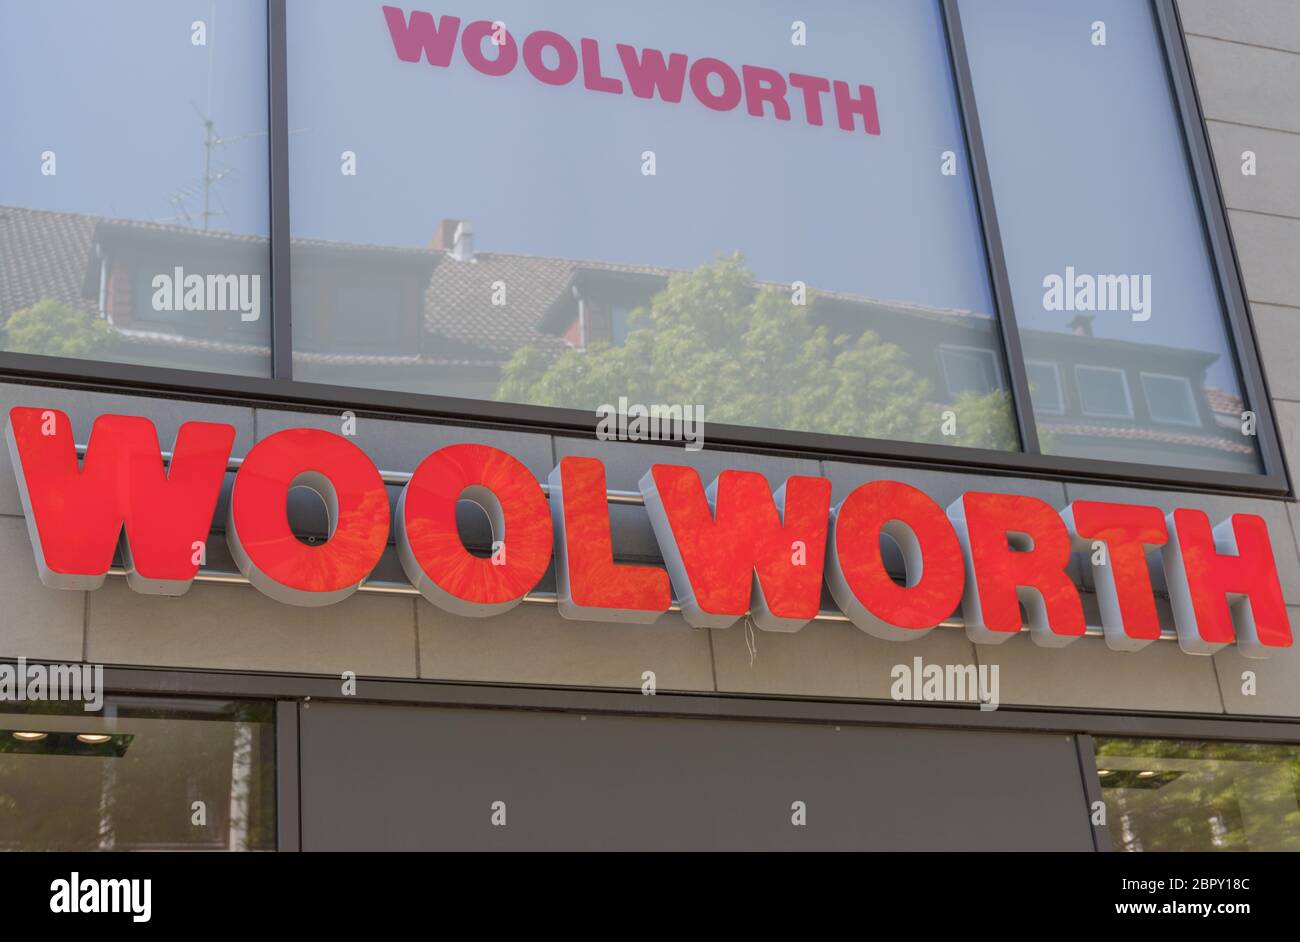 Woolworth Sign Store High Resolution Stock Photography and Images - Alamy